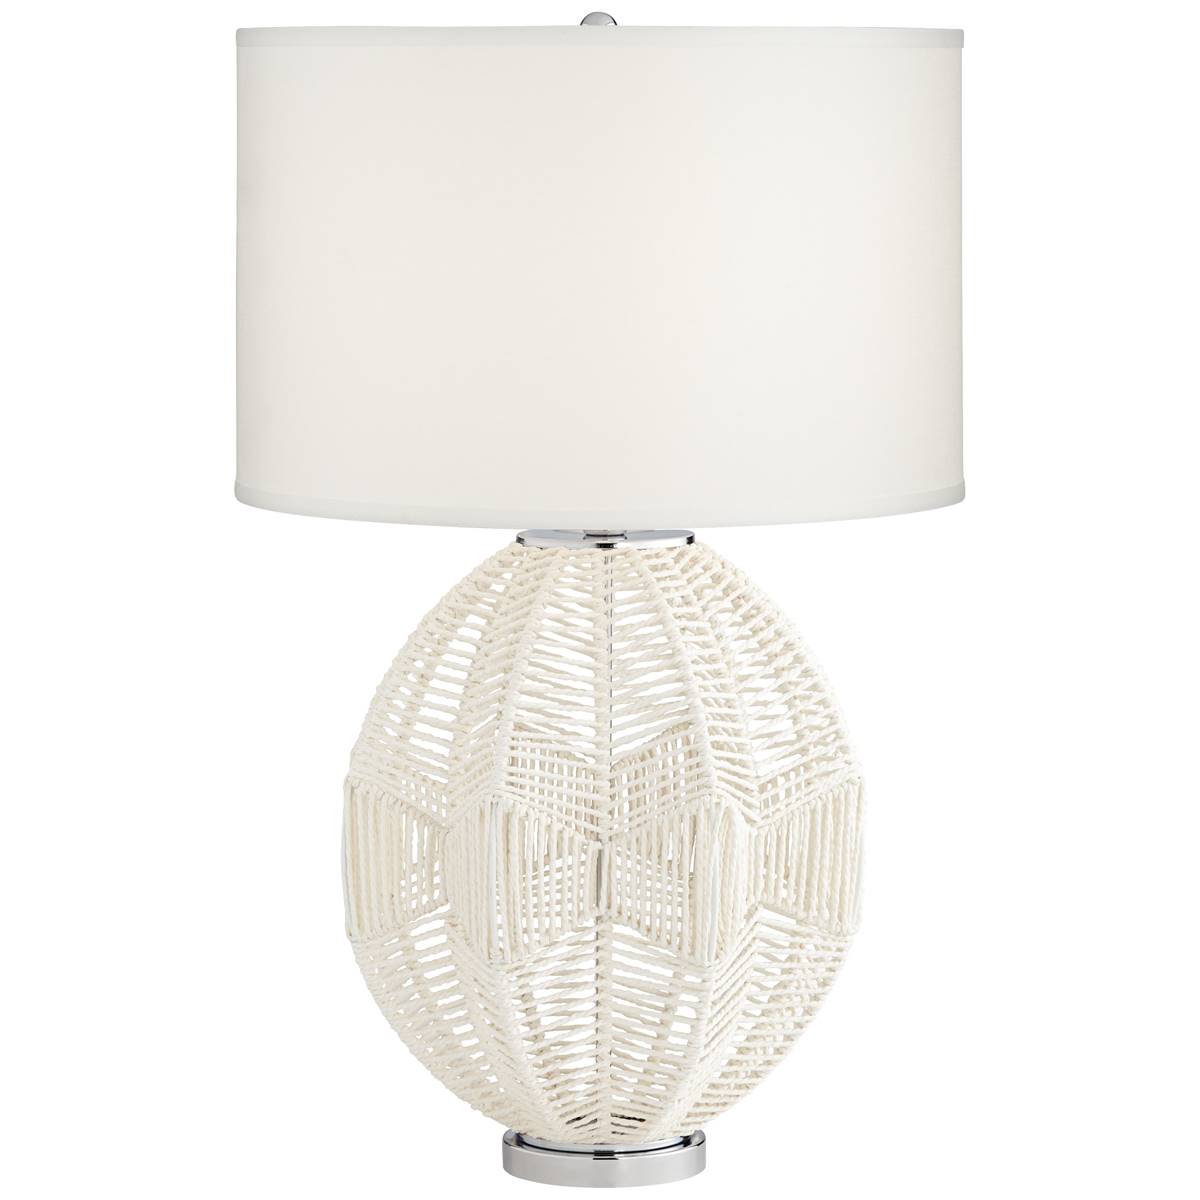 Pacific Coast Lighting North Shore 29in. White Table Lamp